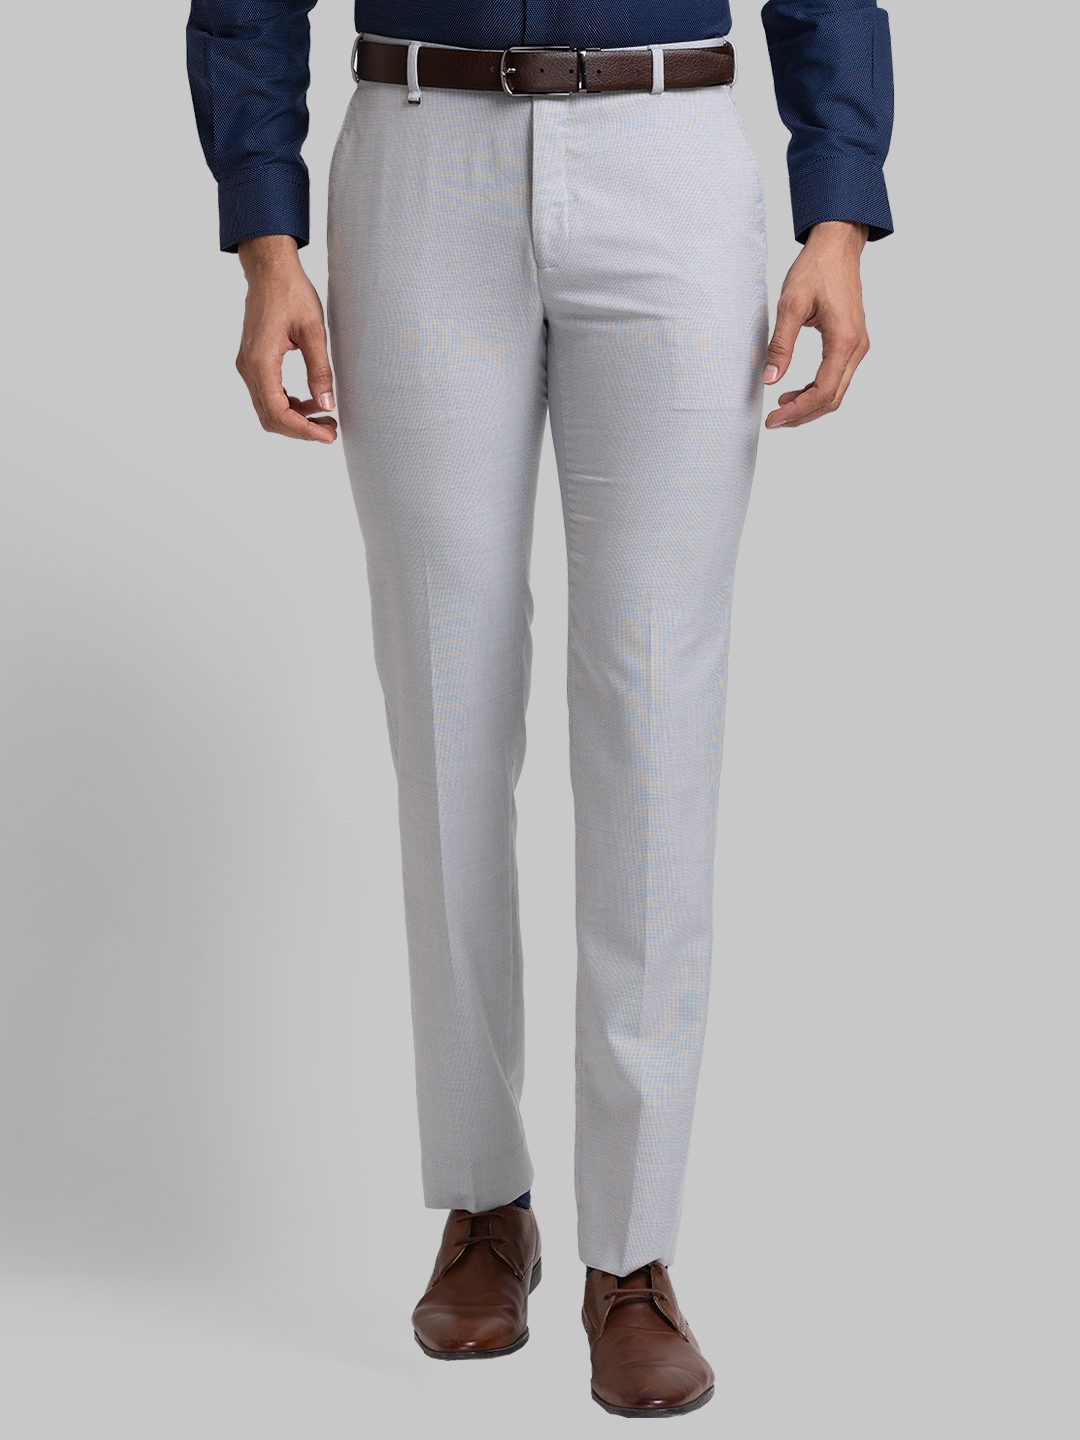 Buy RAYMOND Mens 5 Pocket Check Formal Trousers | Shoppers Stop